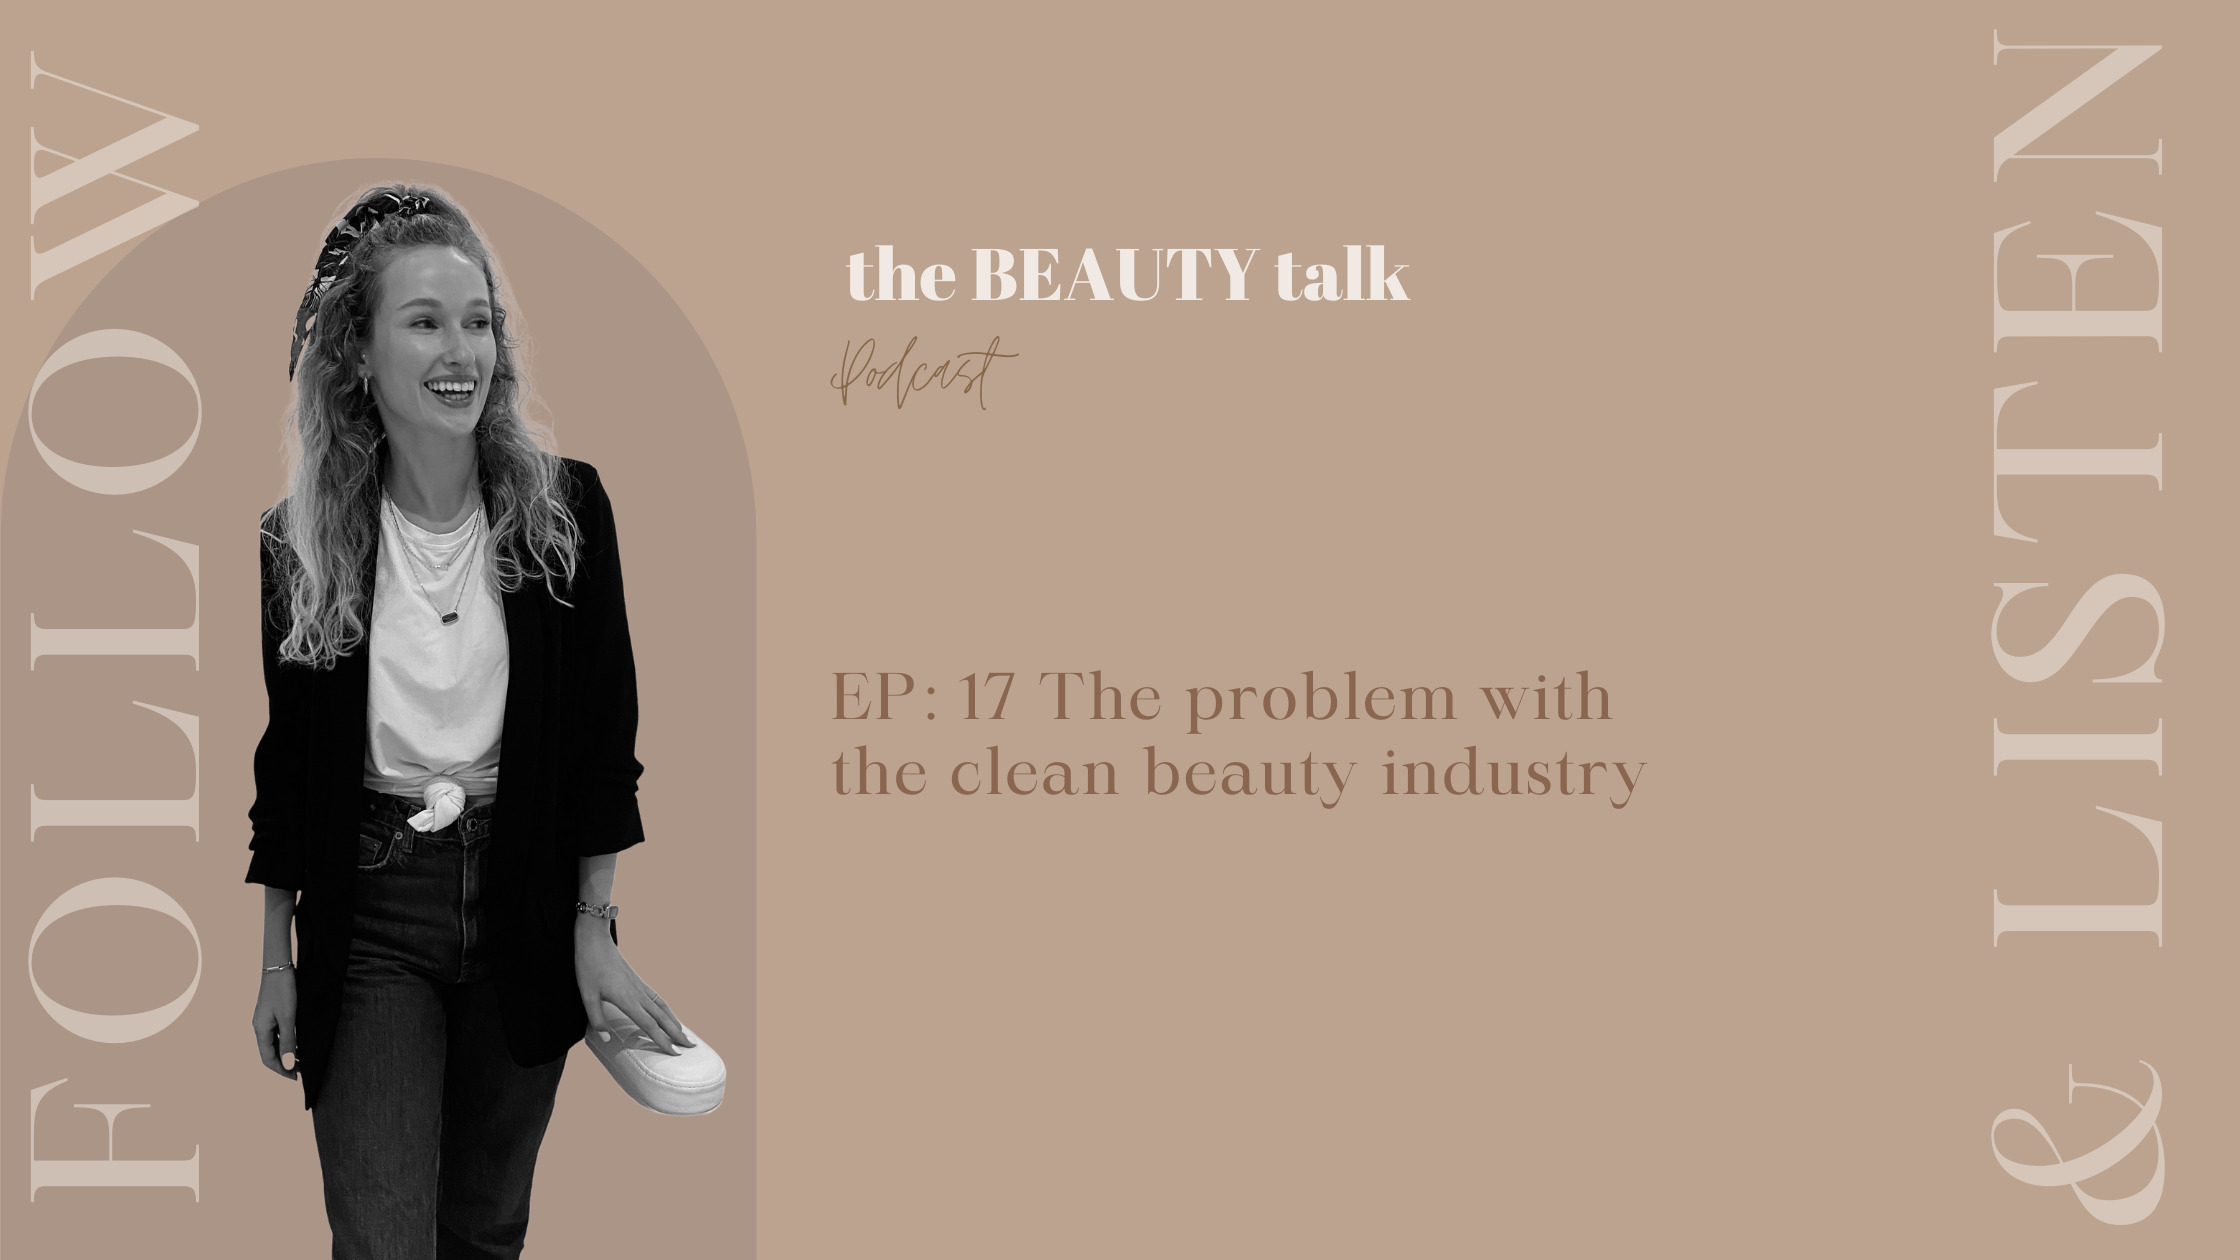 EP: 17 The problem with the clean beauty industry